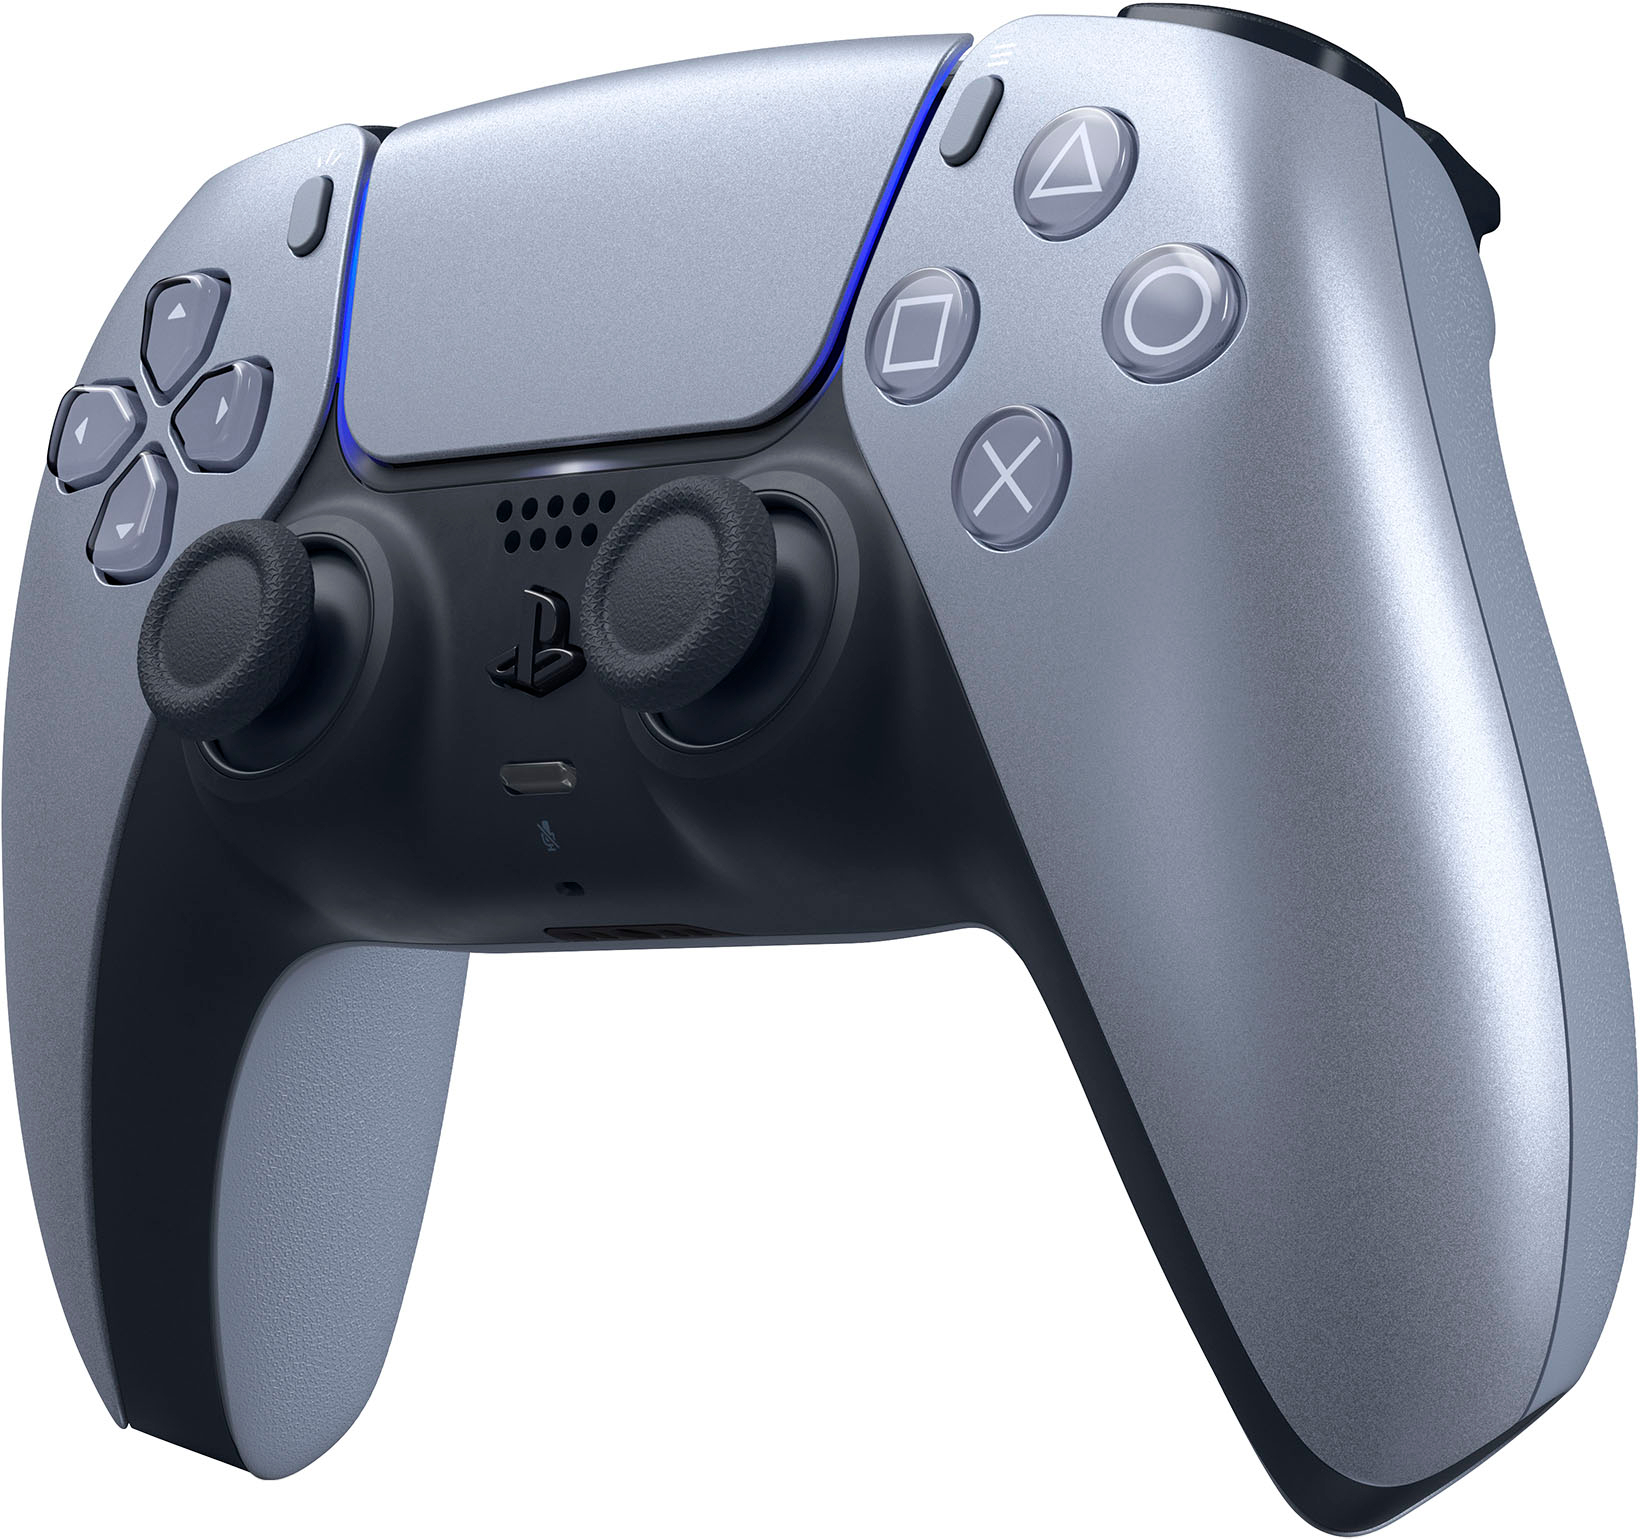 PS5 DualSense Controller On Sale At PlayStation Direct For $54.99 ($15 Off  / Over 21% Off) - PlayStation Universe